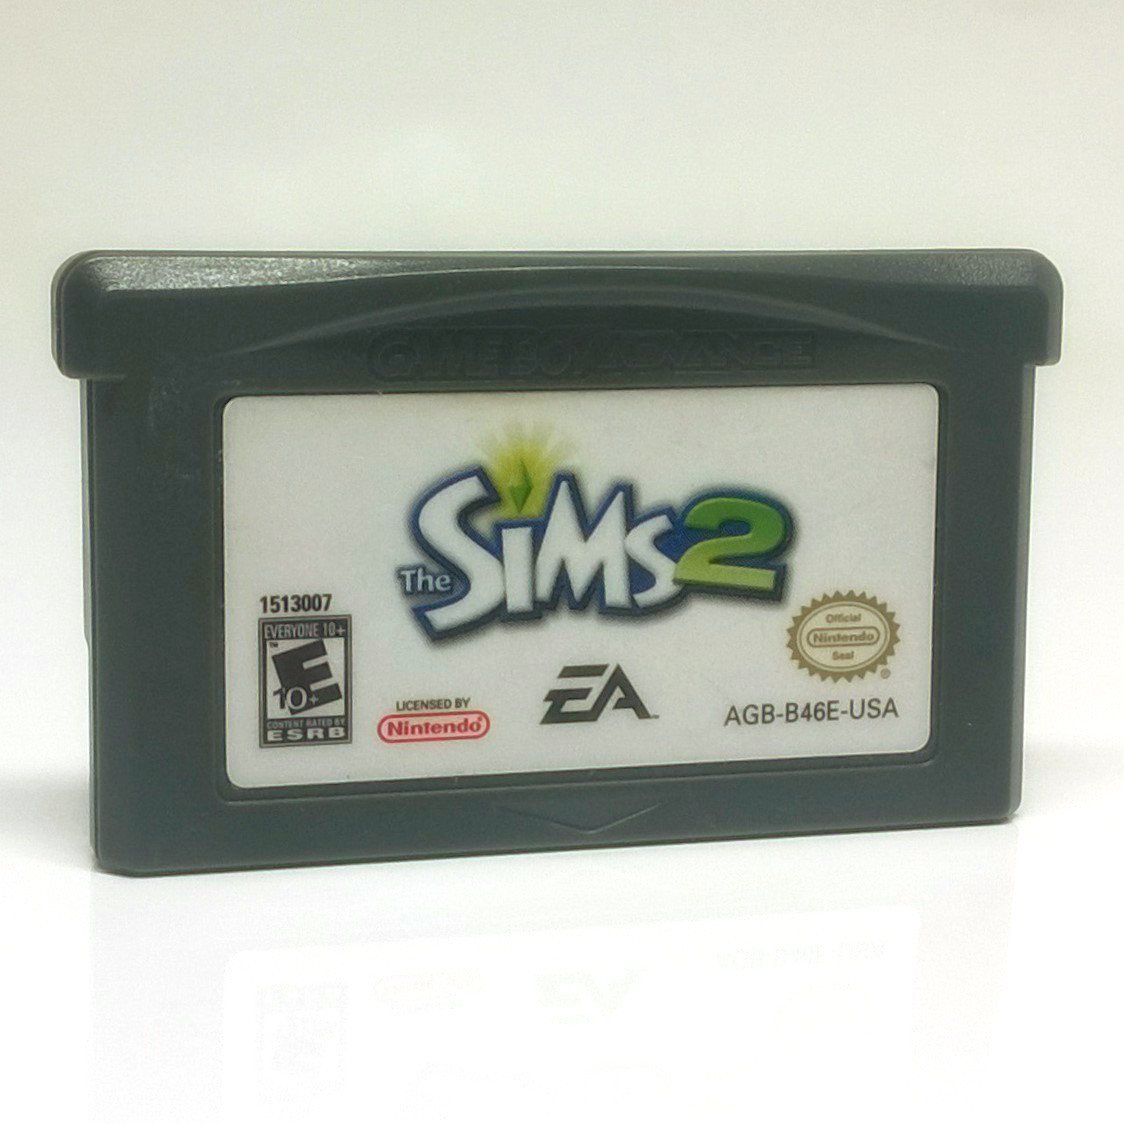 The Sims 2 Cheats For PC PlayStation 2 Game Boy Advance PSP Xbox